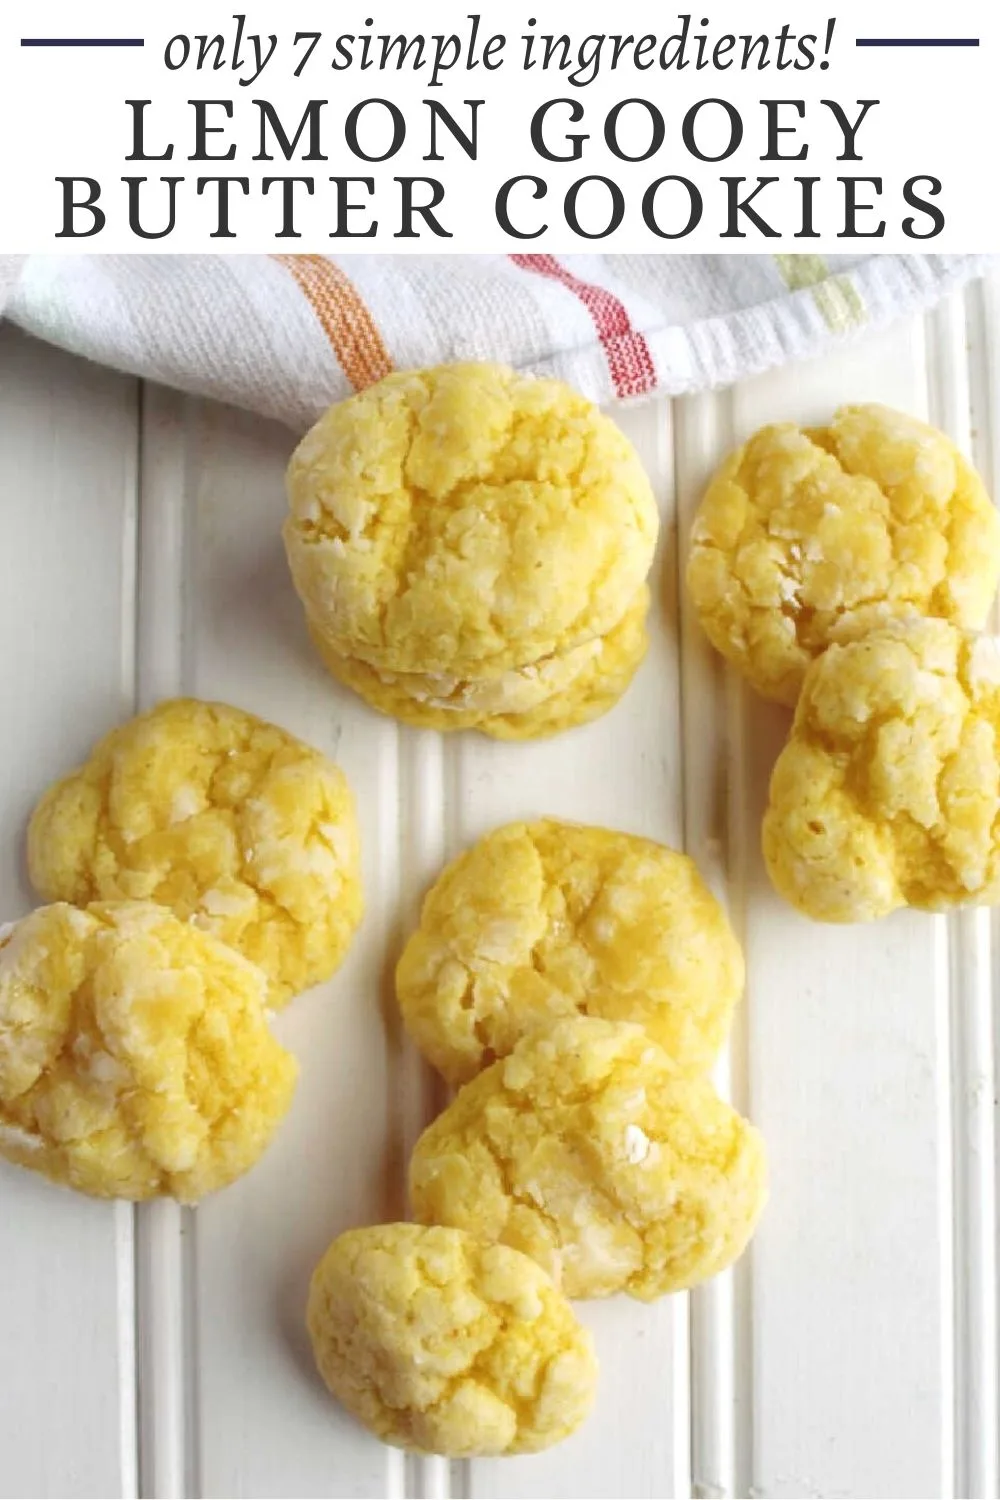 This easy 7 ingredient cookie recipe makes perfectly soft cookies with a gooey butter center and big lemon flavor. They are easy to make with the help of a cake mix and they taste amazing.